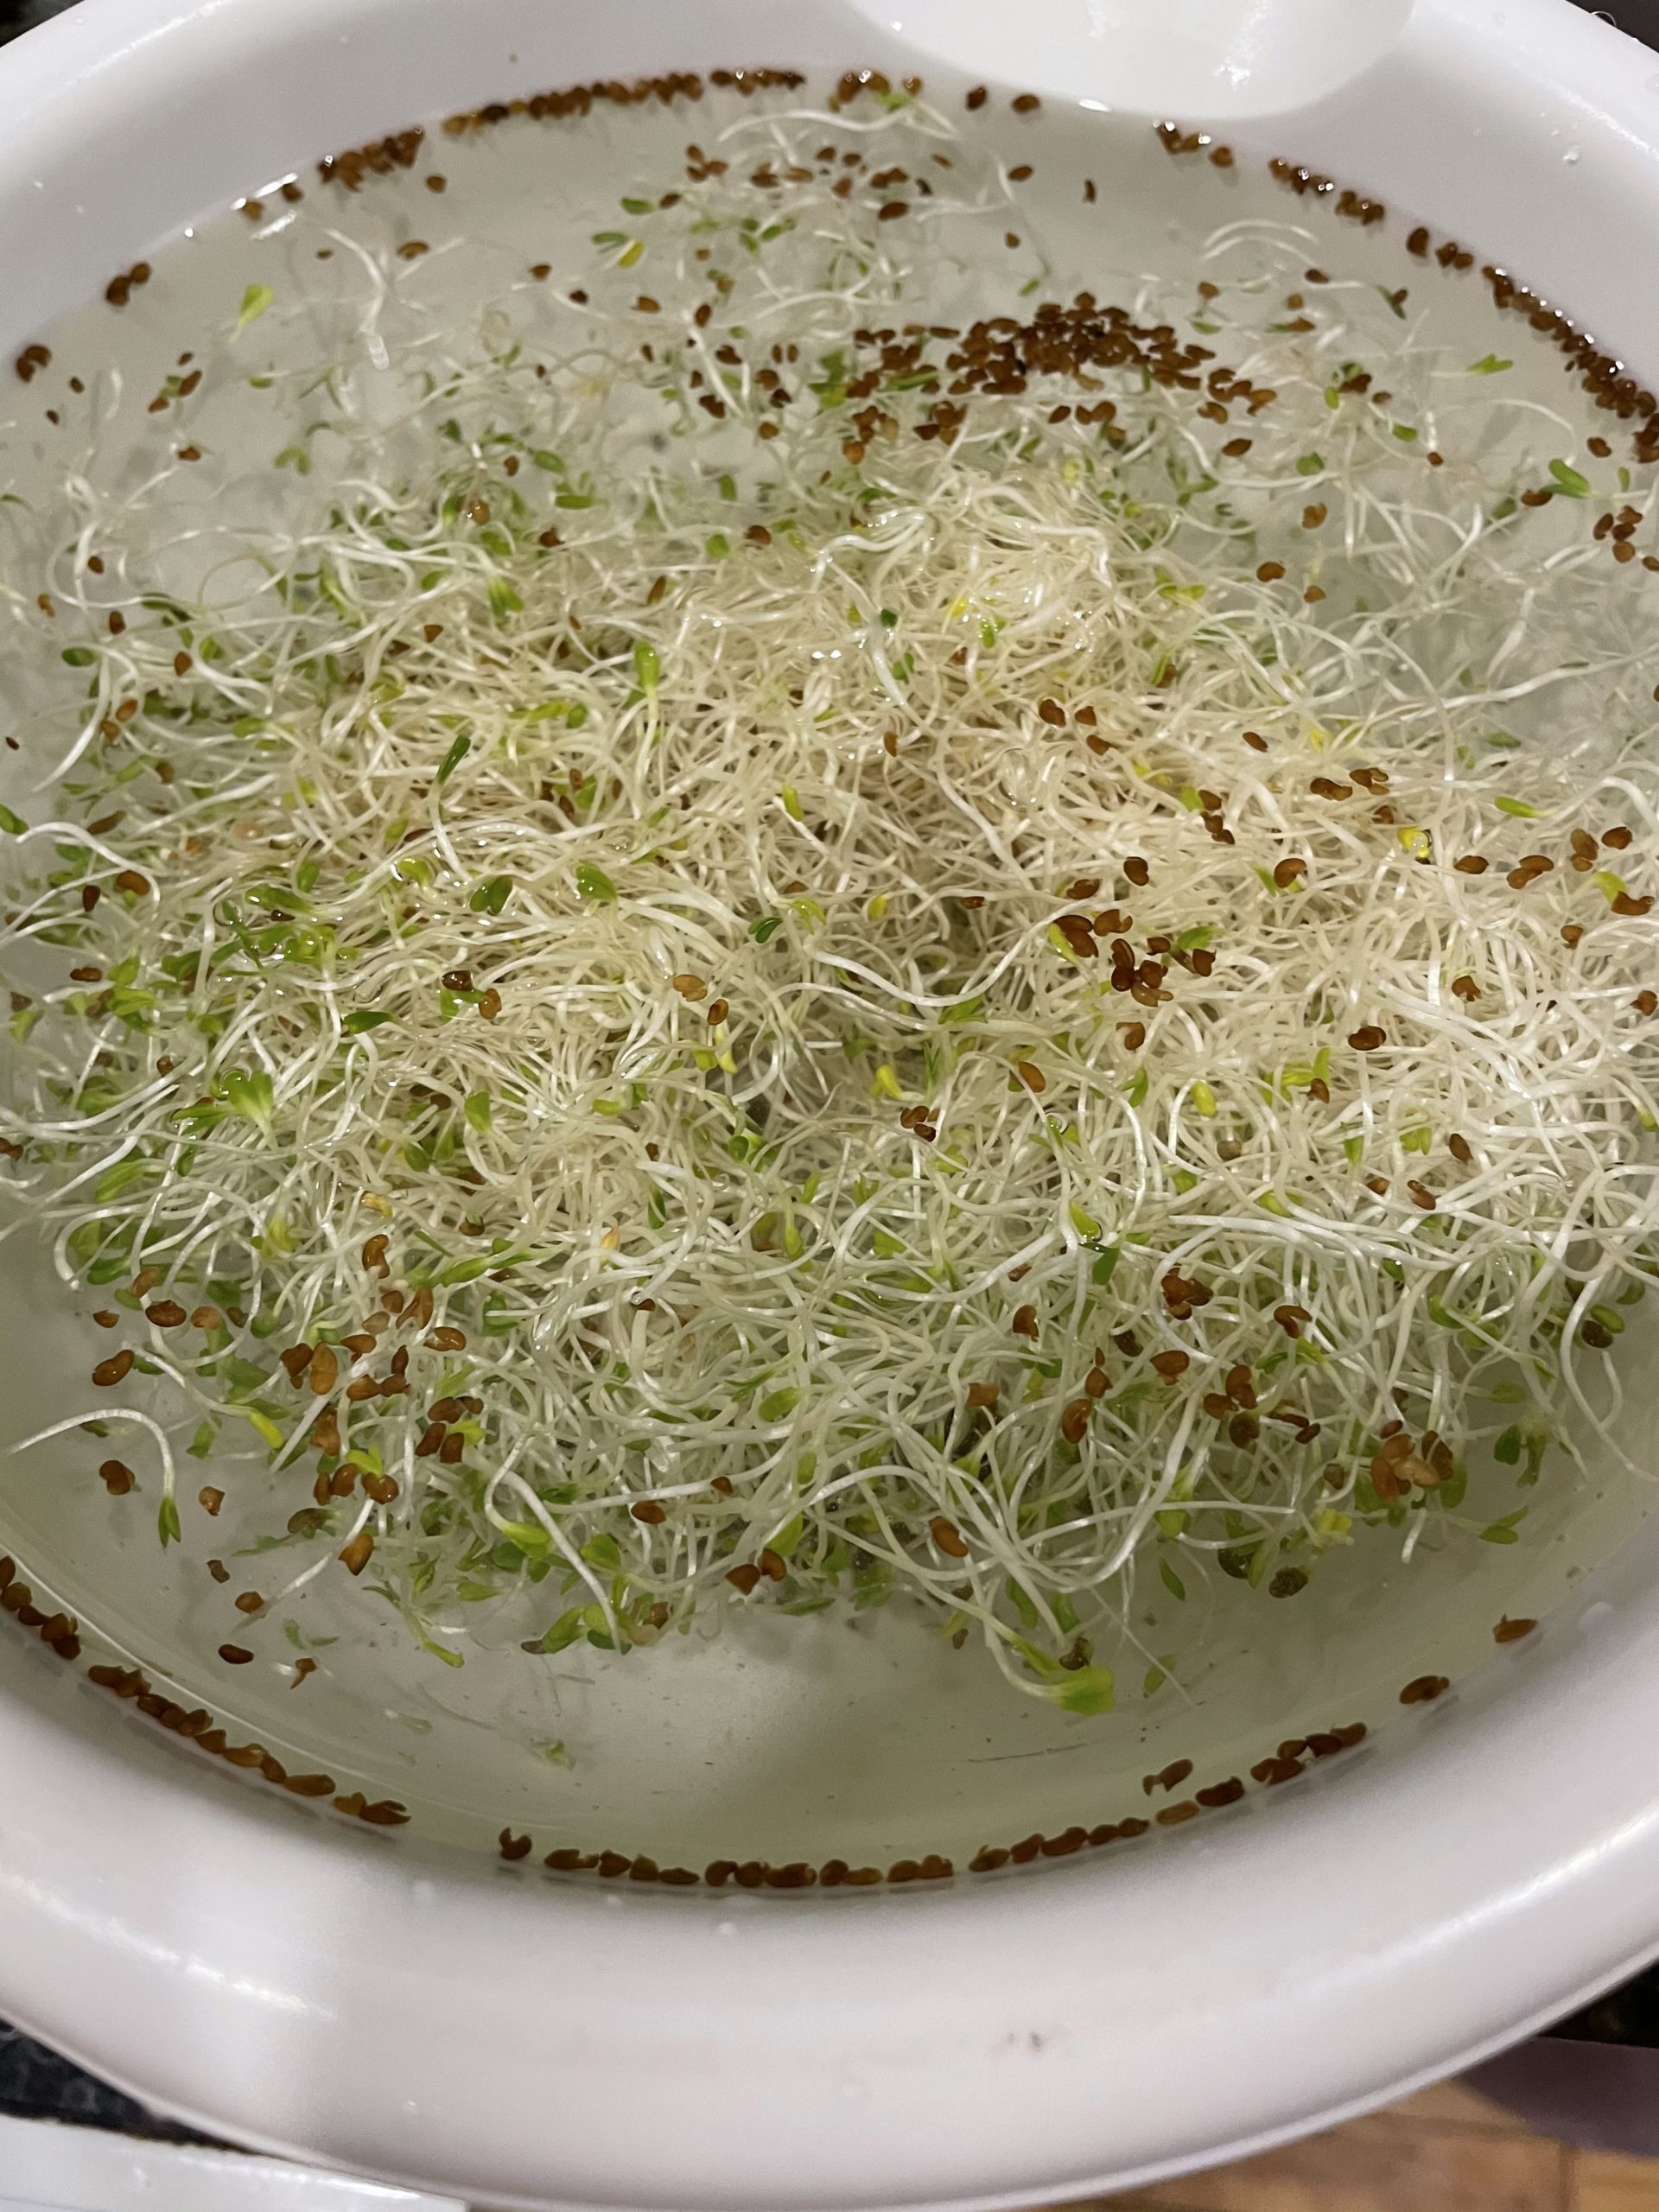 Rinsing sprouts